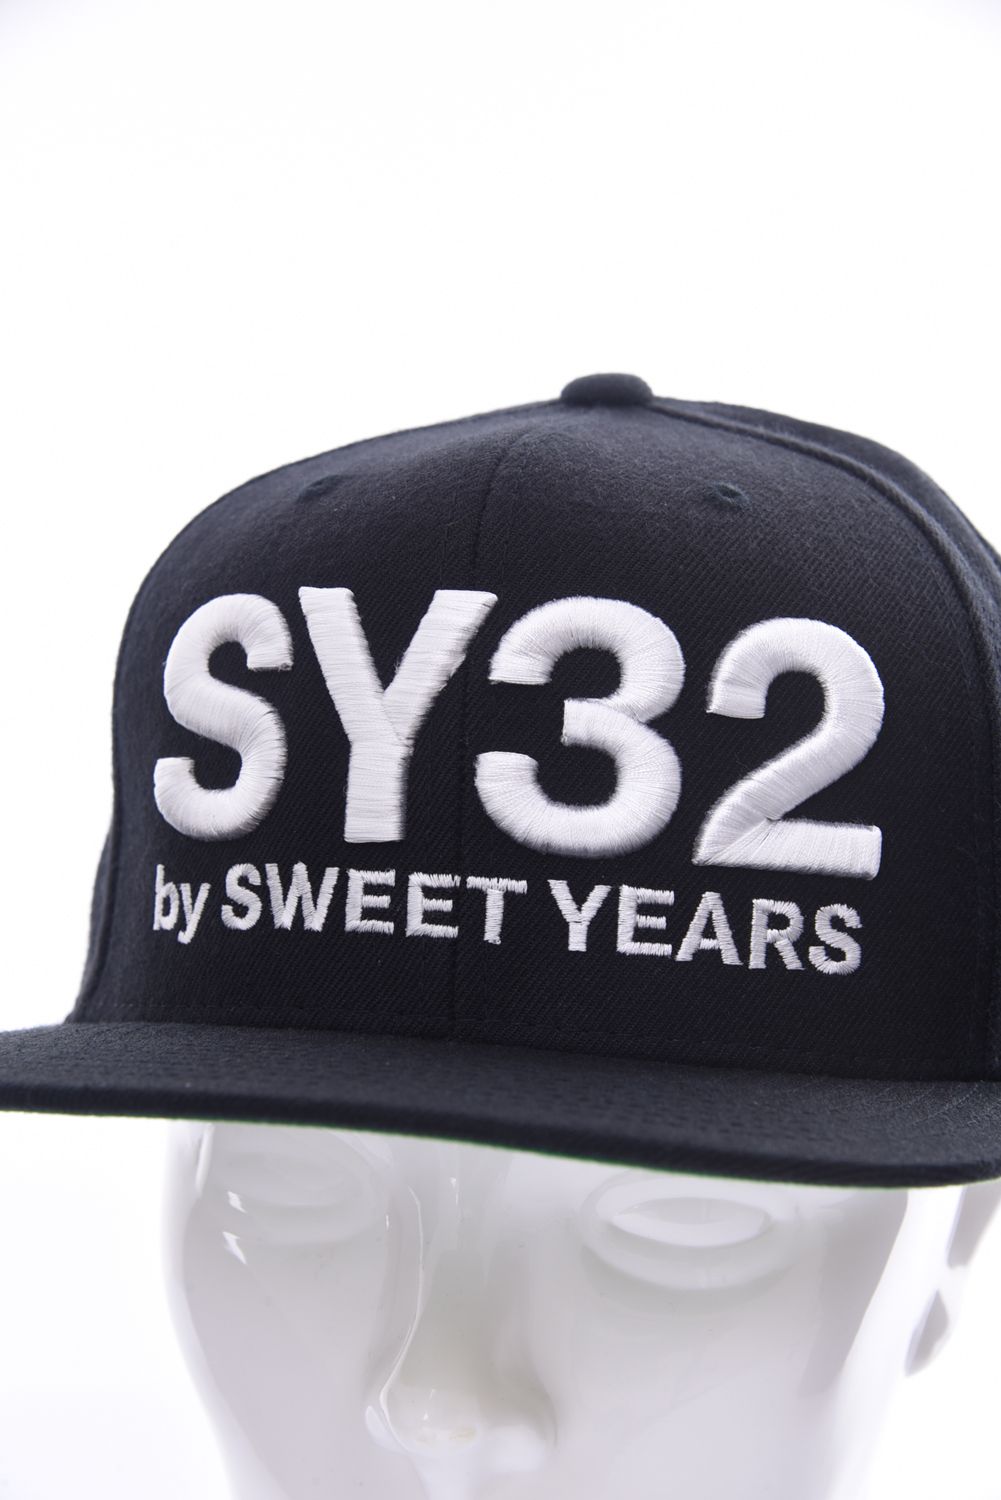 SY32 by SWEET YEARS GOLF - 3D LOGO SNAPBACK CAP / 3Dロゴ スナップ